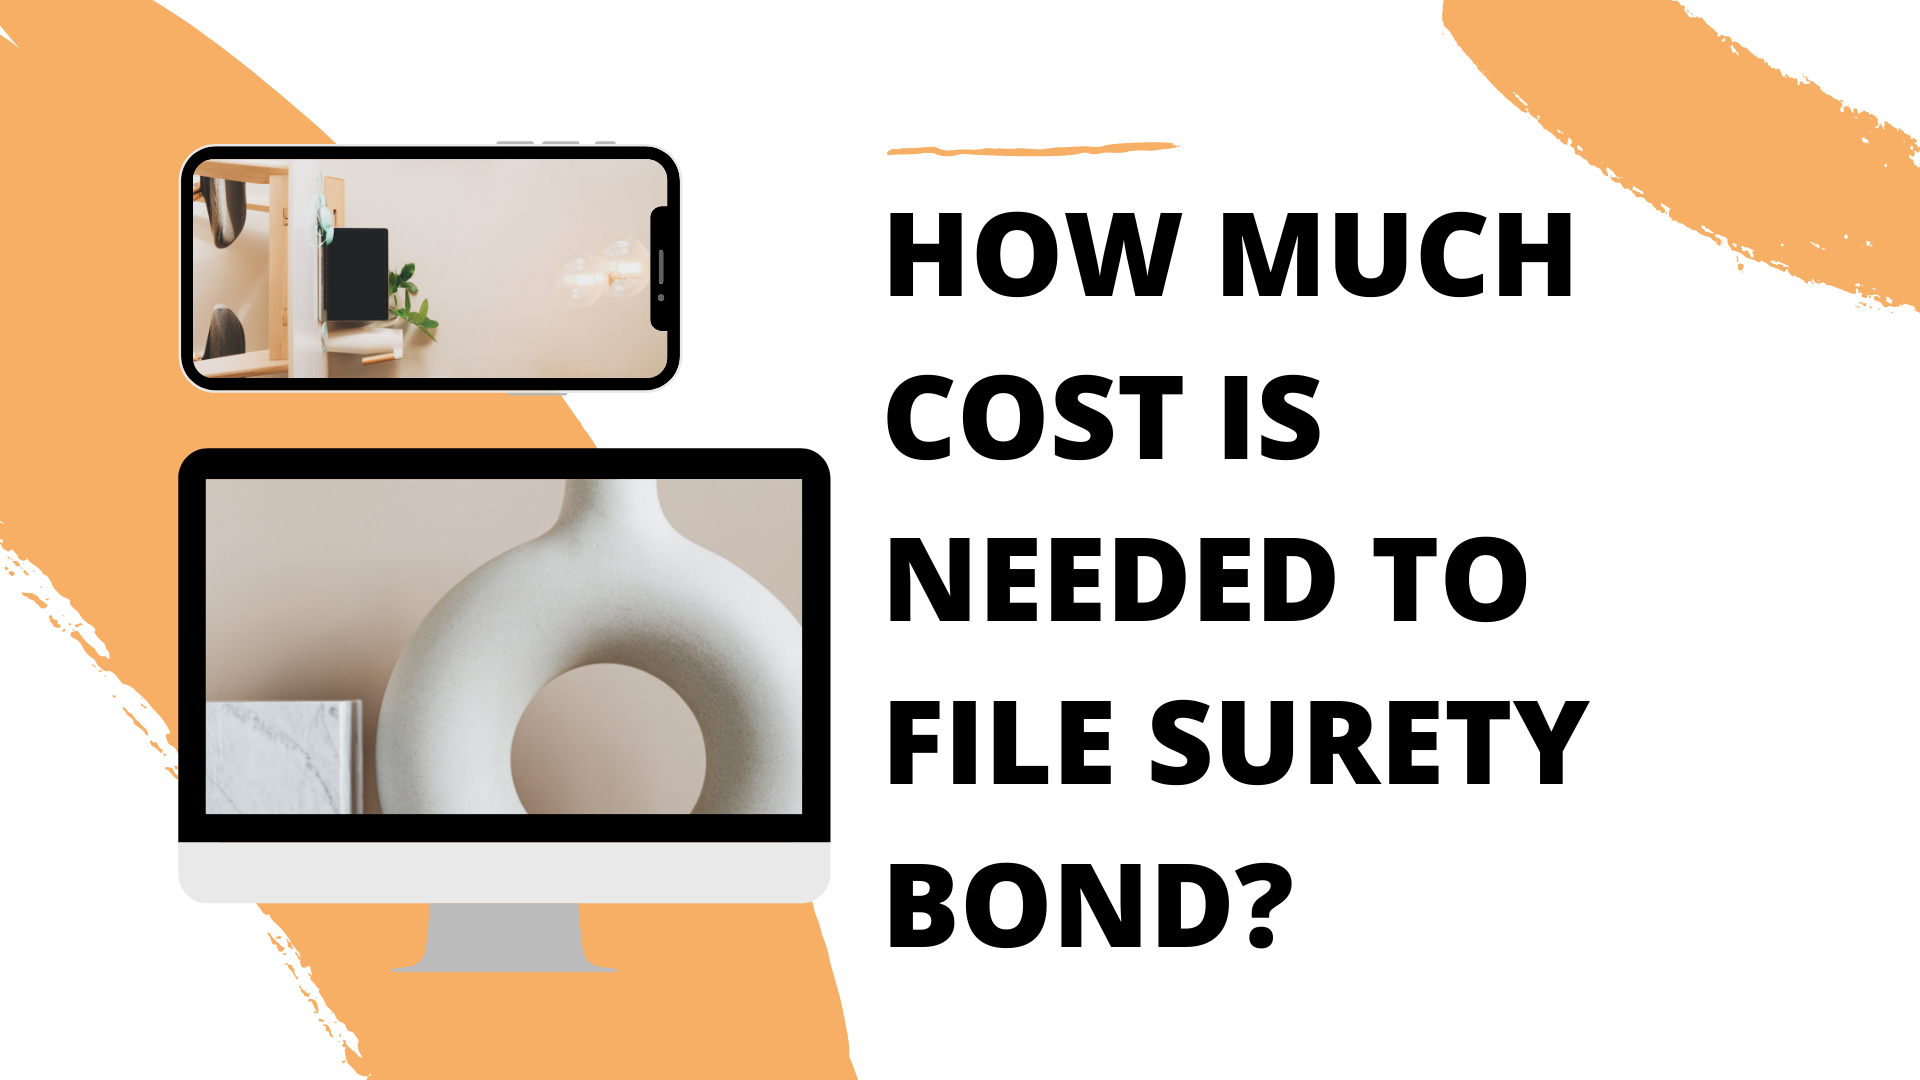 surety bond - How much cost is needed to file a Surety Bond - technology